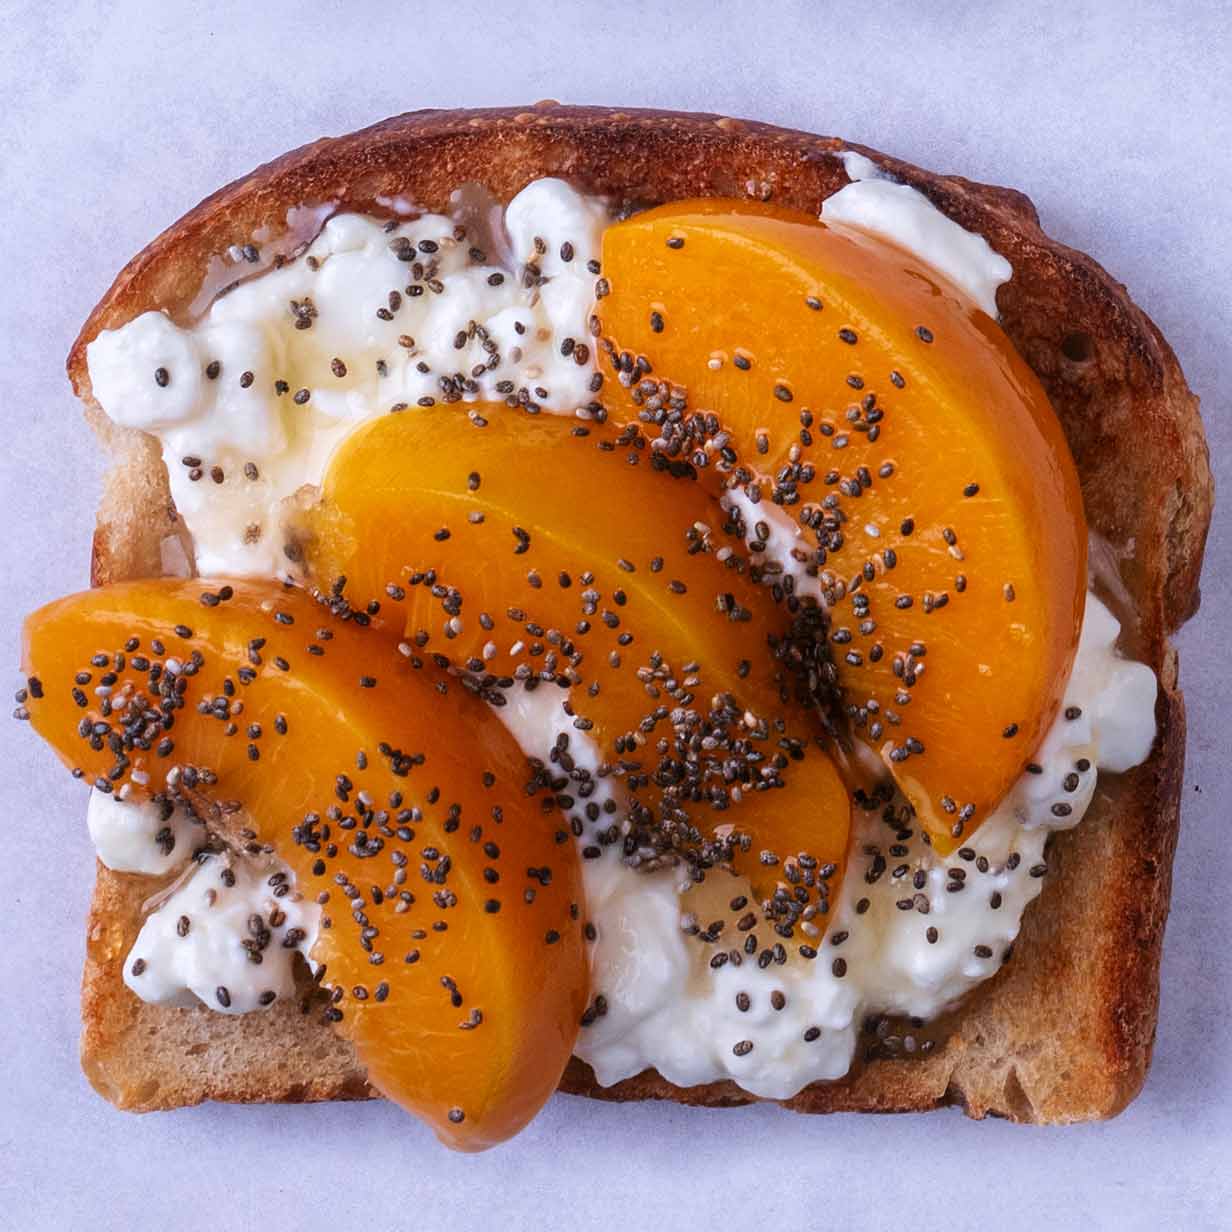 Slices of peach and chia seeds on top of cottage cheese on toast.